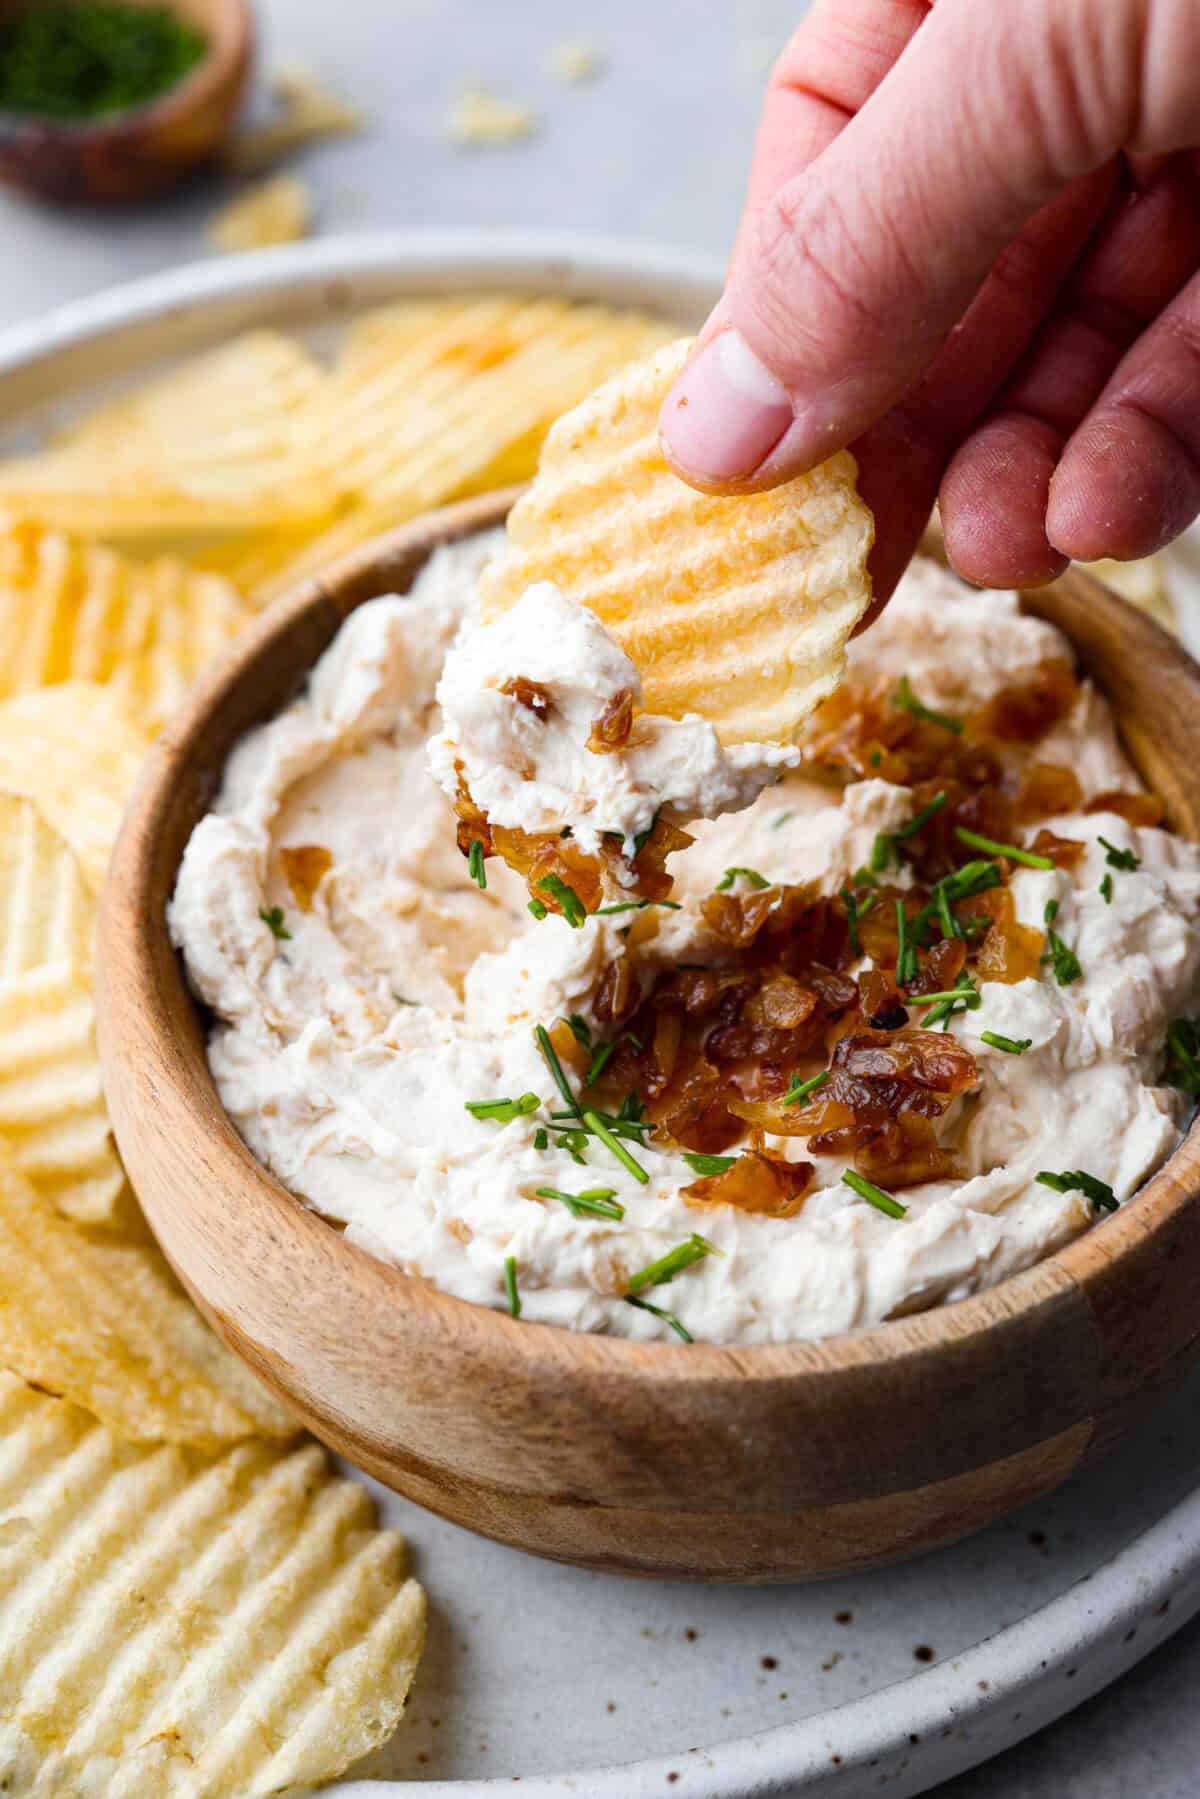 Close view of a chip dipping into bowl of French onion dip.